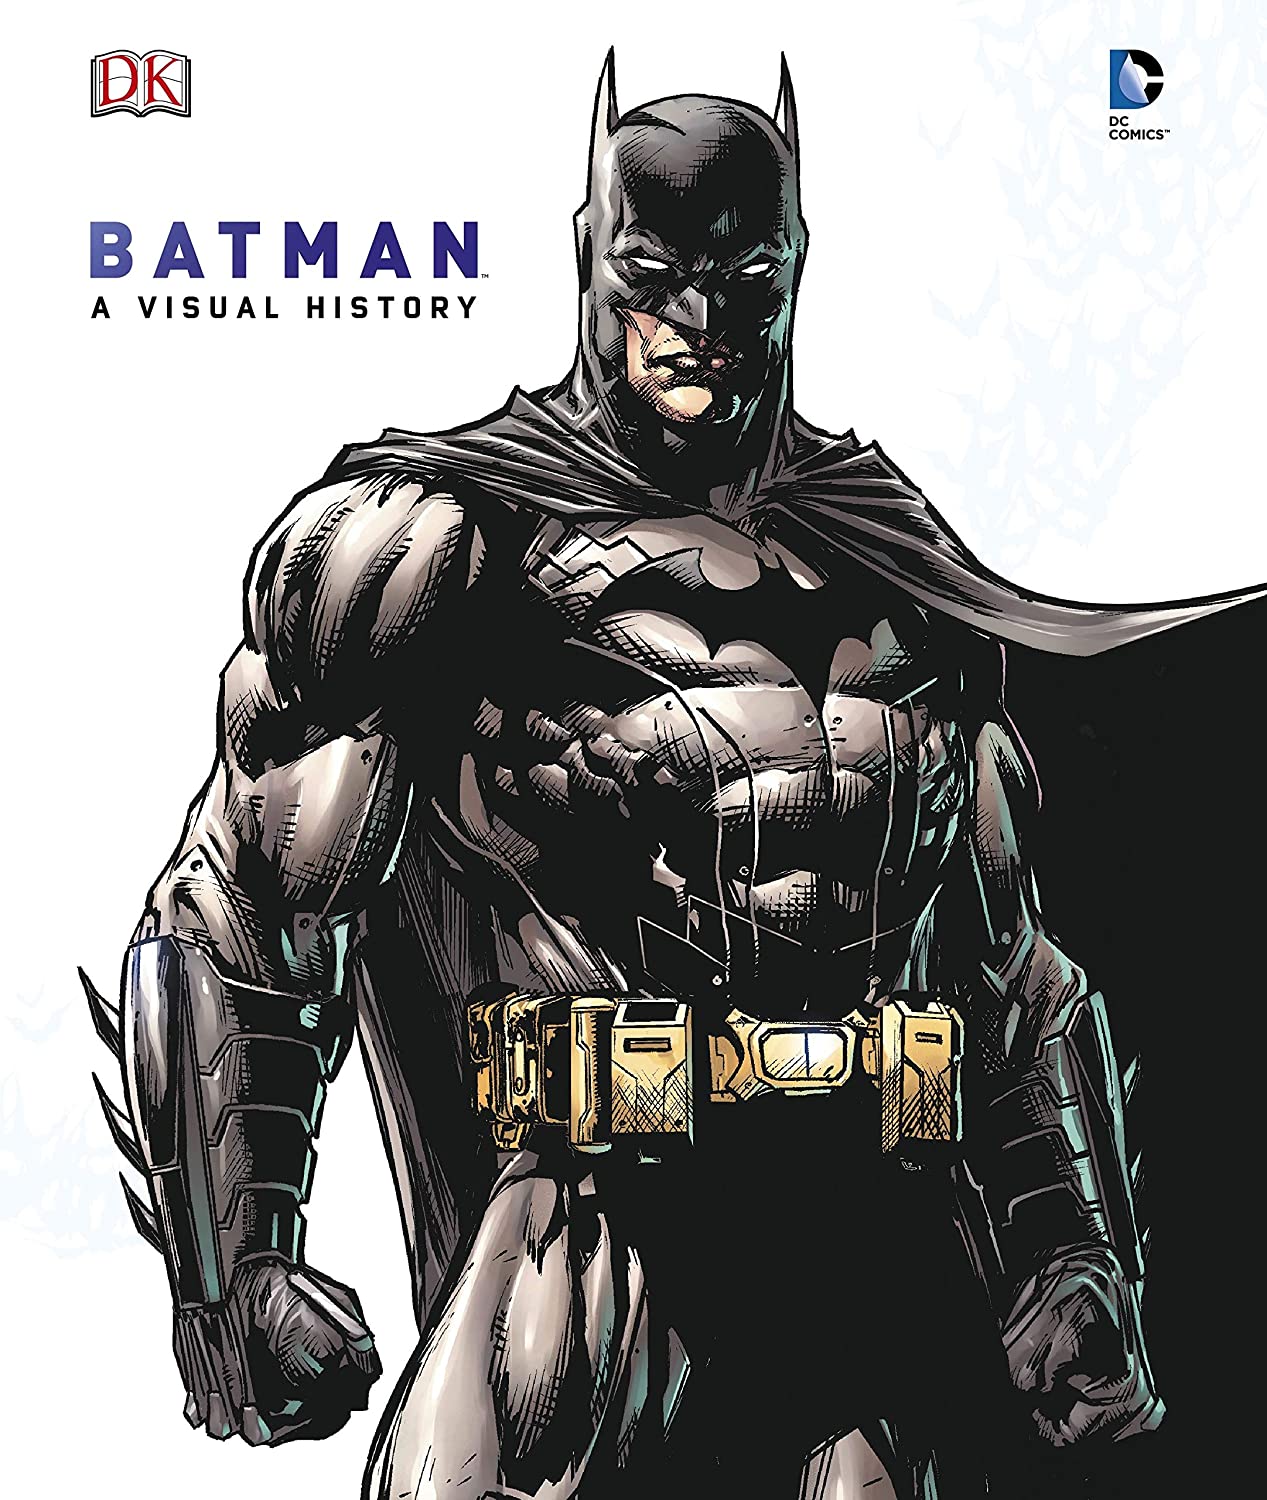 Batman: A Visual History by DK | Chapters